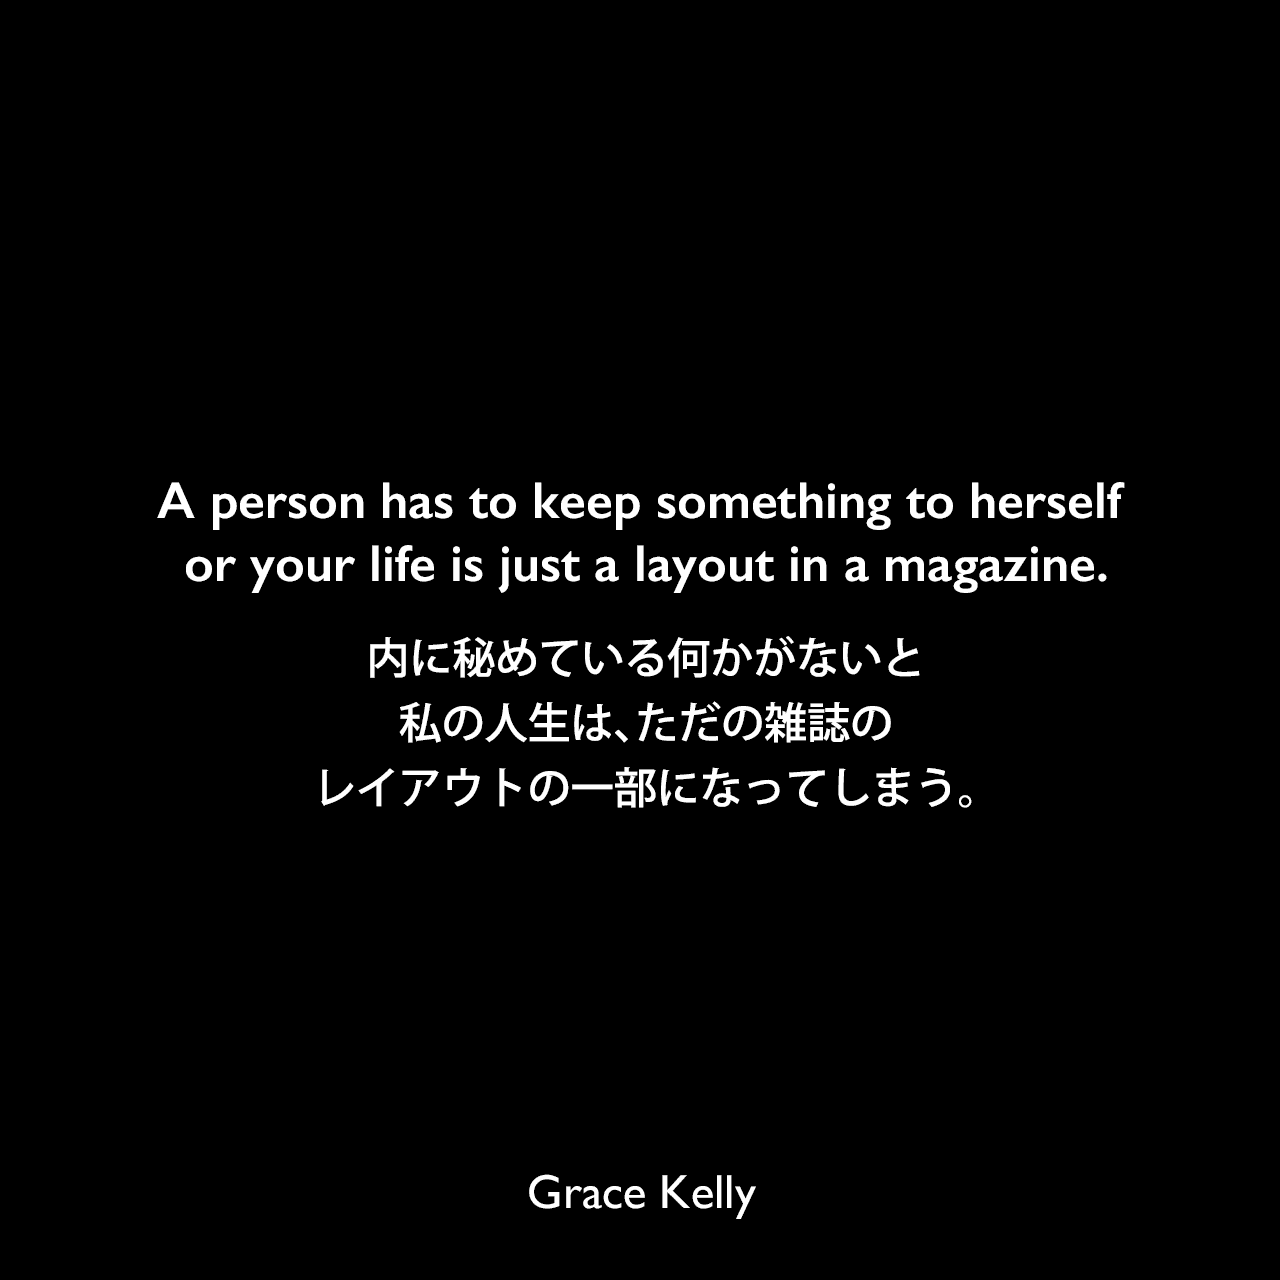 A person has to keep something to herself or your life is just a layout in a magazine.内に秘めている何かがないと、私の人生は、ただの雑誌のレイアウトの一部になってしまう。Grace Kelly